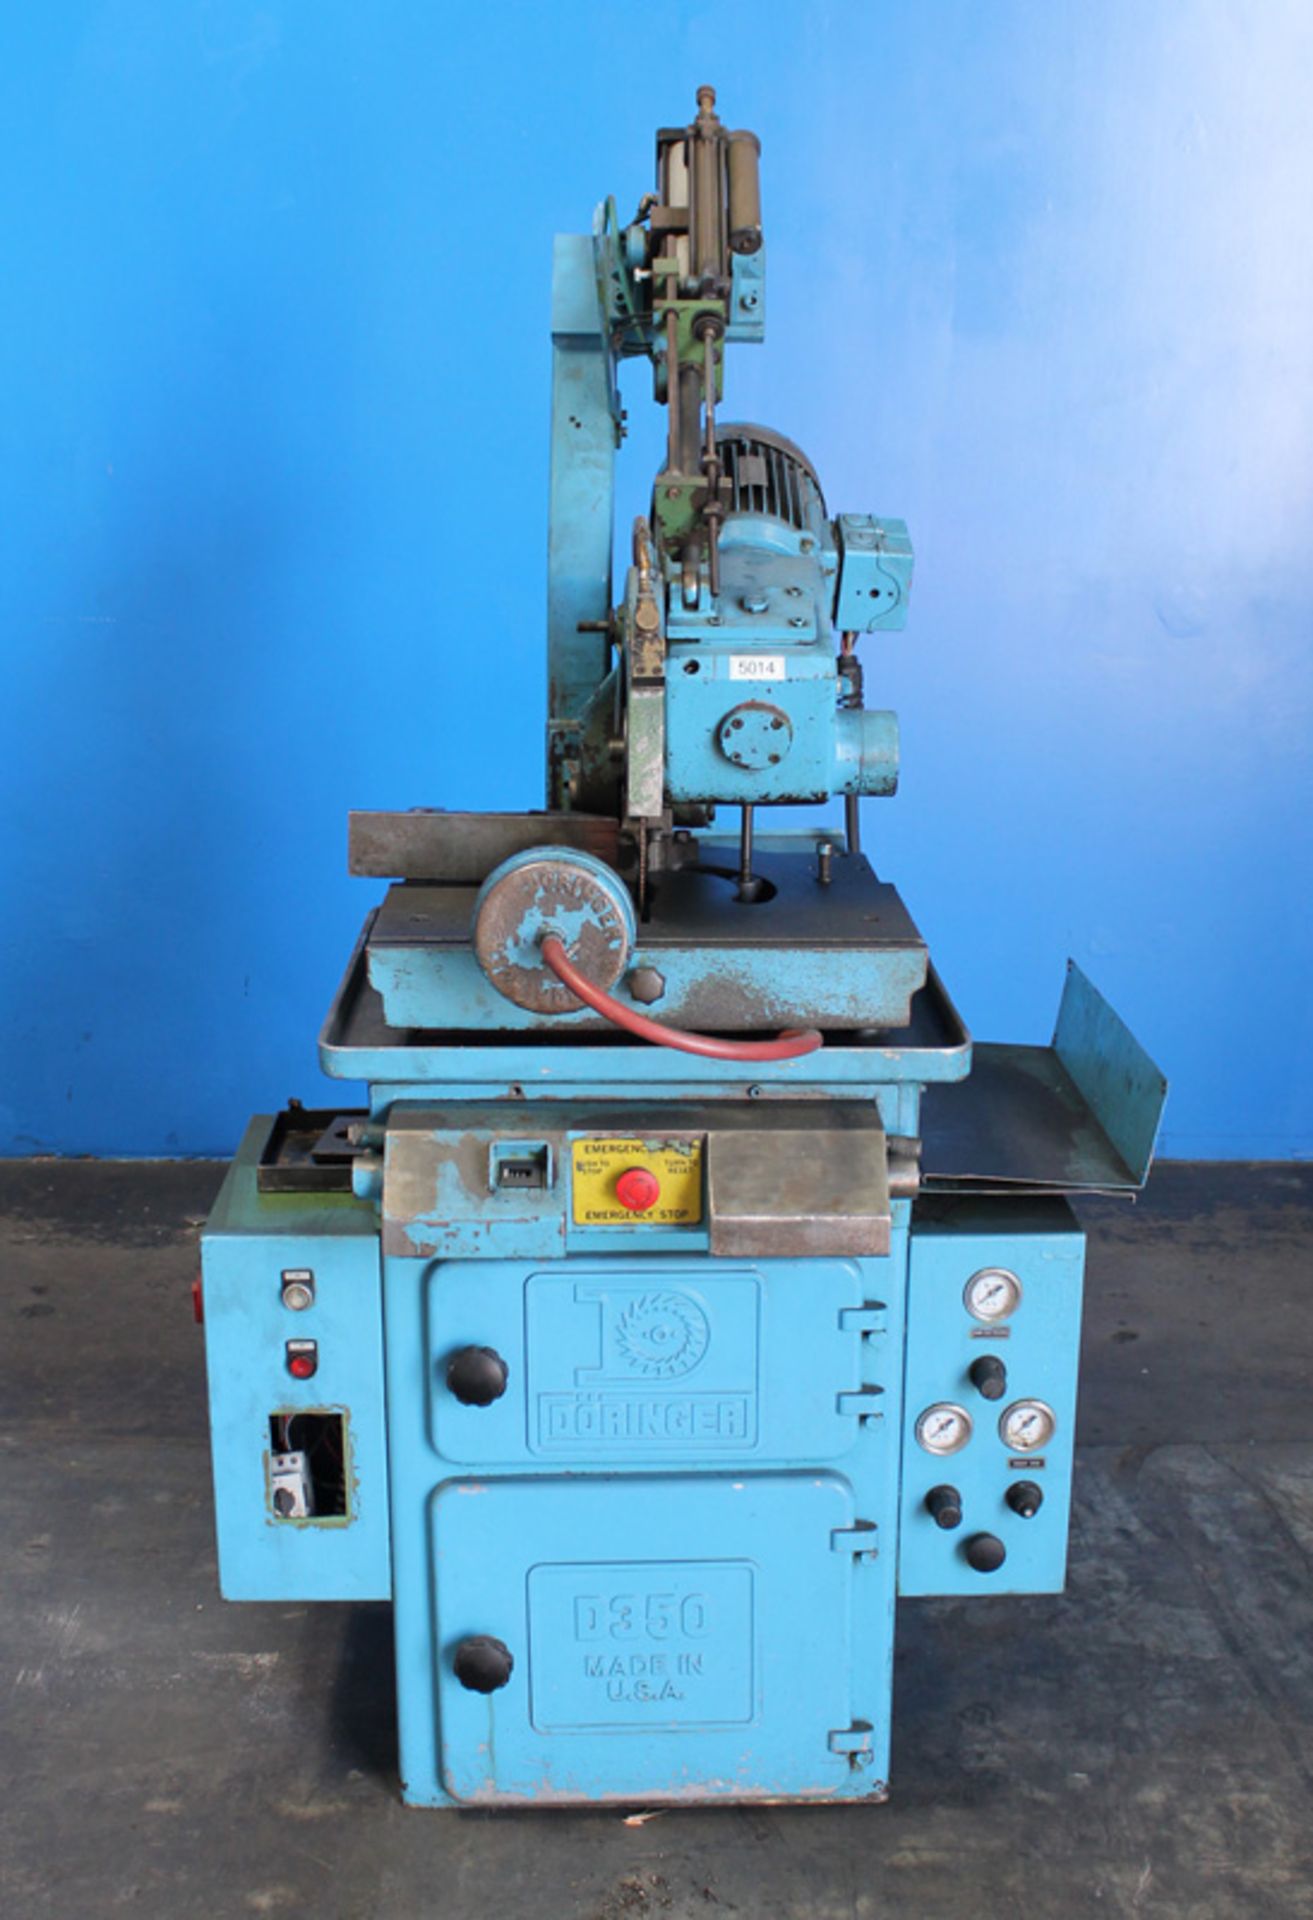 Doringer Semi-Automatic Cold Saw | 14", Mdl: D-350H, S/N: 21304 - 5014HP